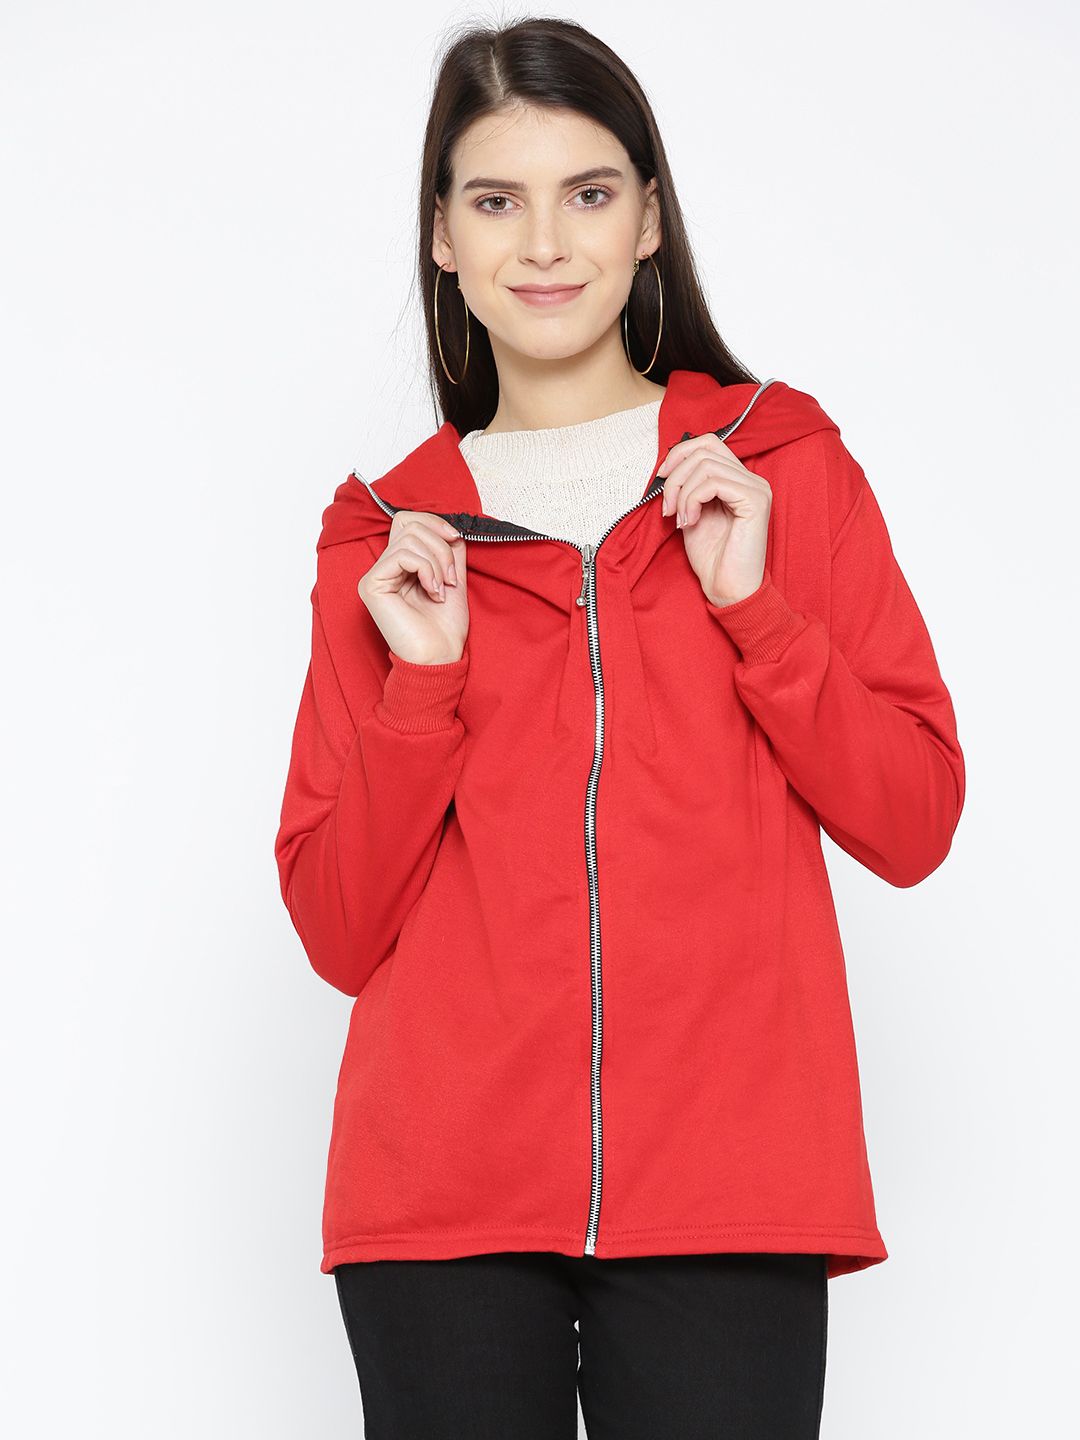 Belle Fille Women Red Solid Hooded Sweatshirt Price in India